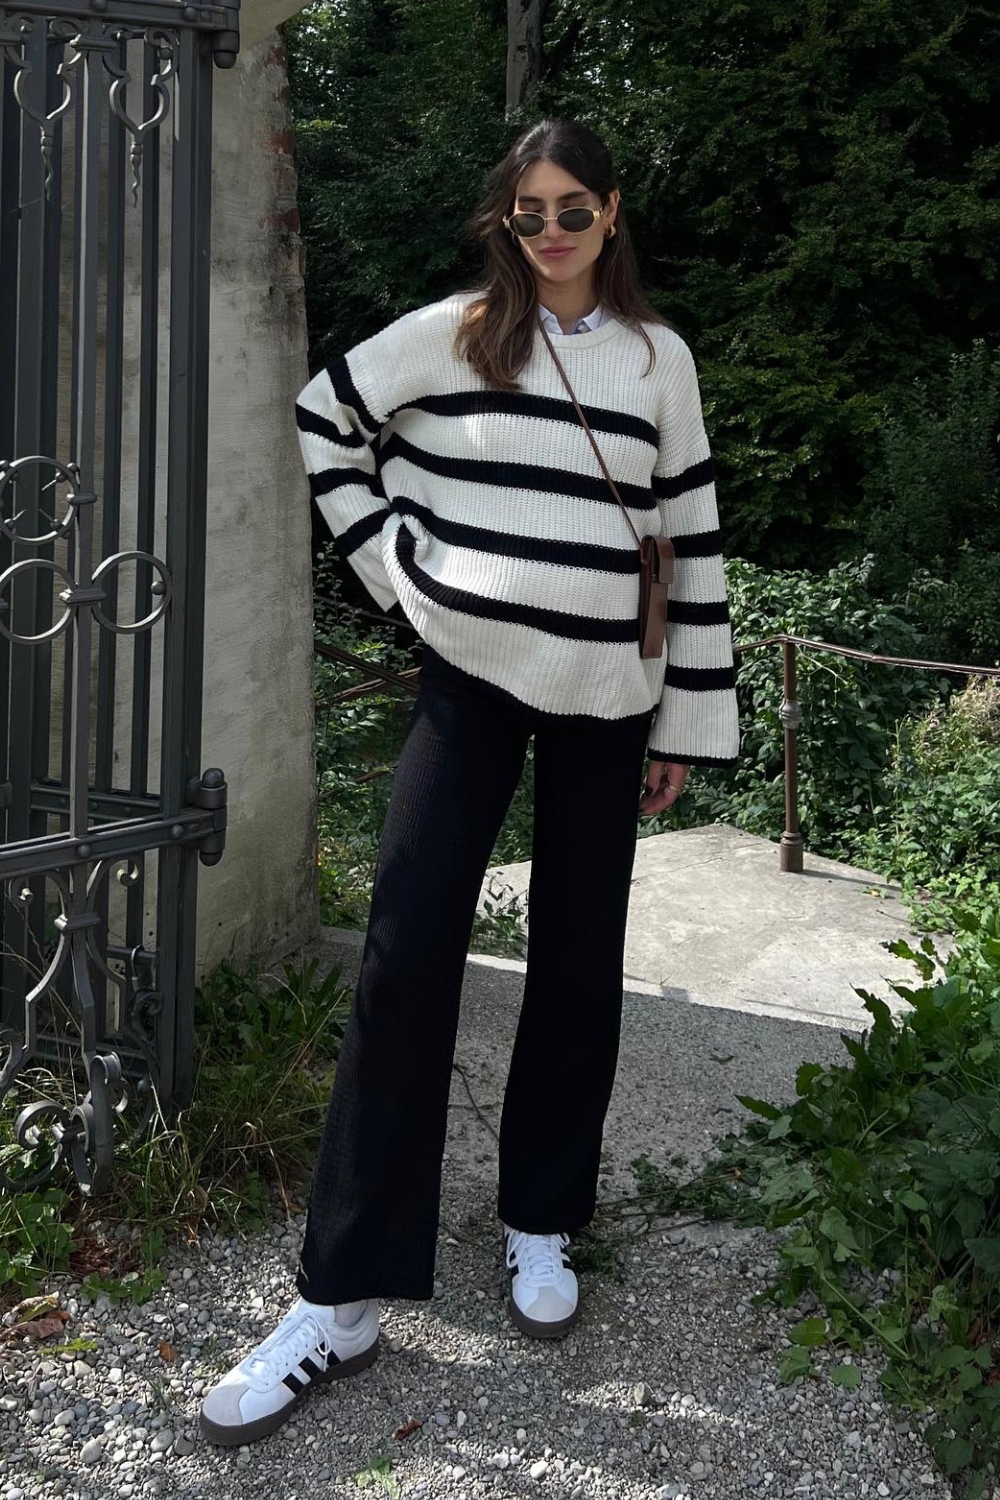 Casual Spring Outfit Ideas - Striped Sweater and Sneakers